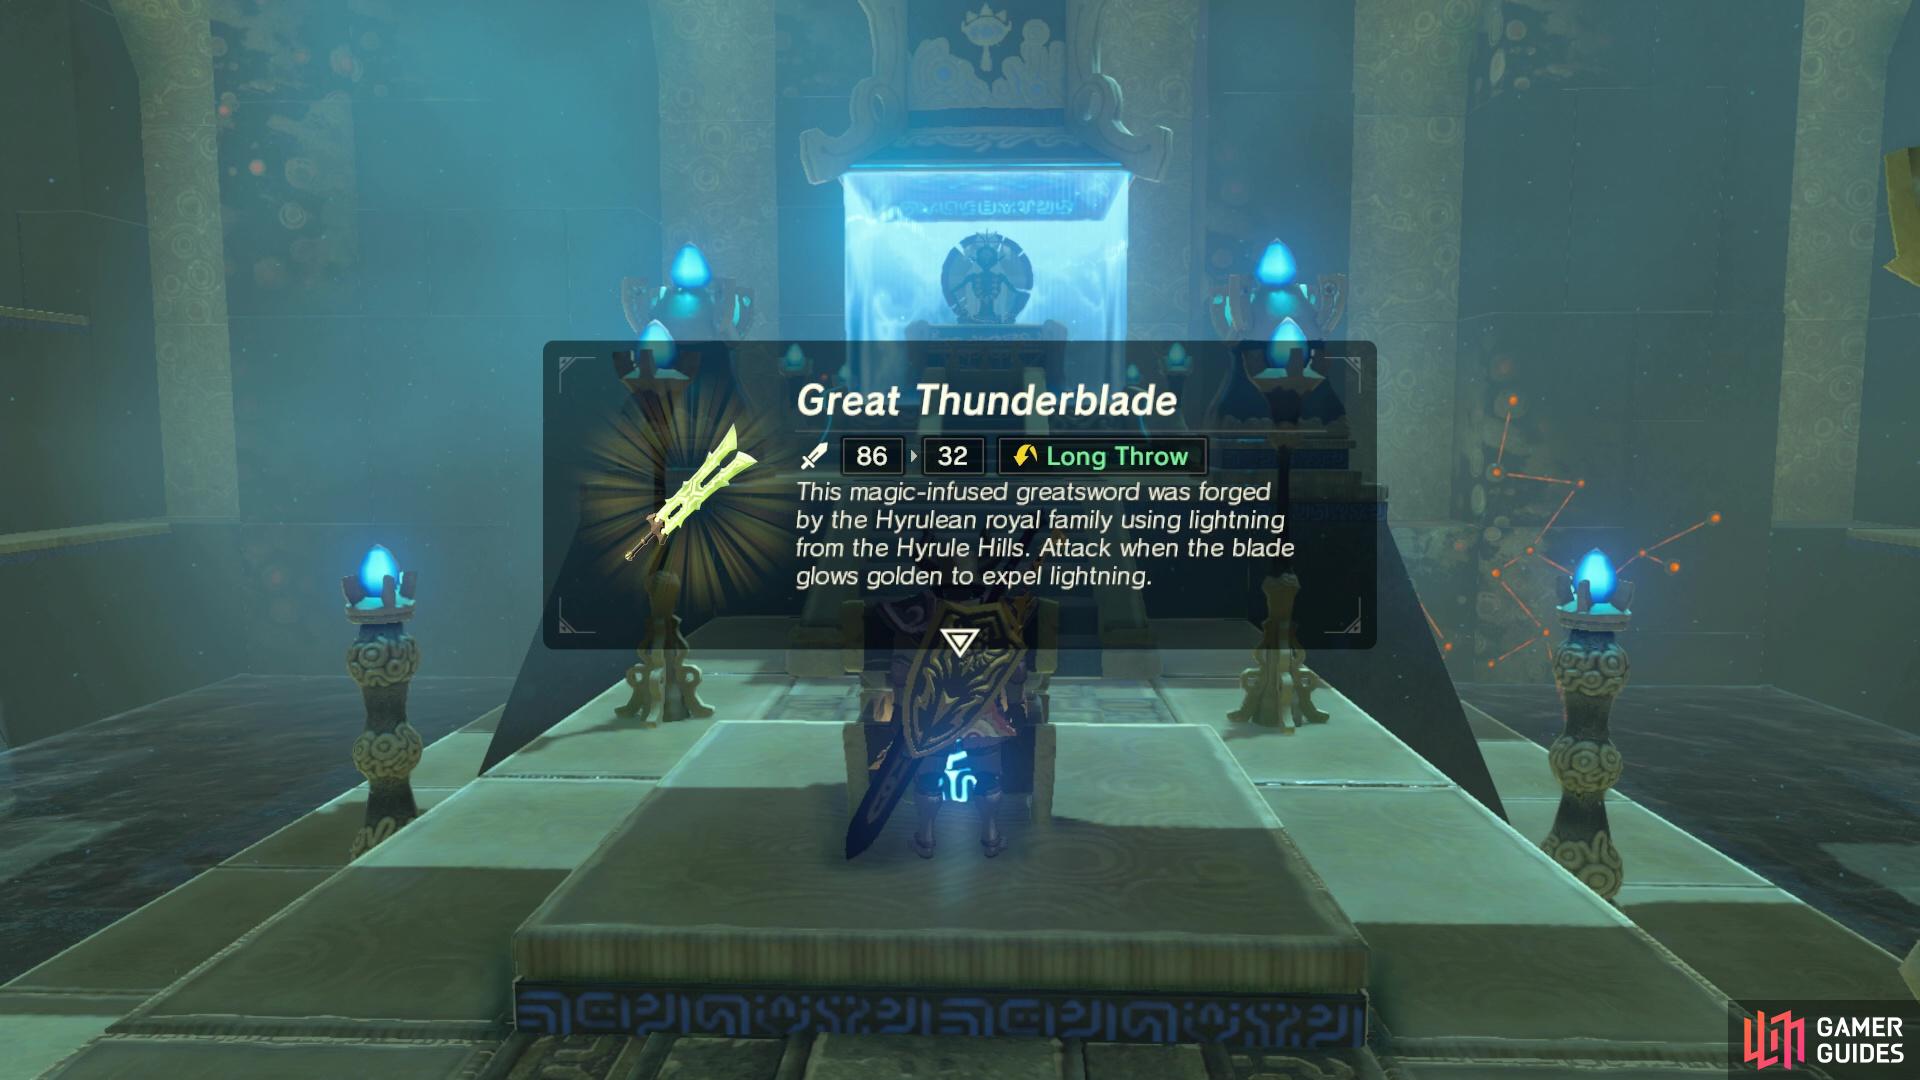 Claim your Great Thunderblade prize!